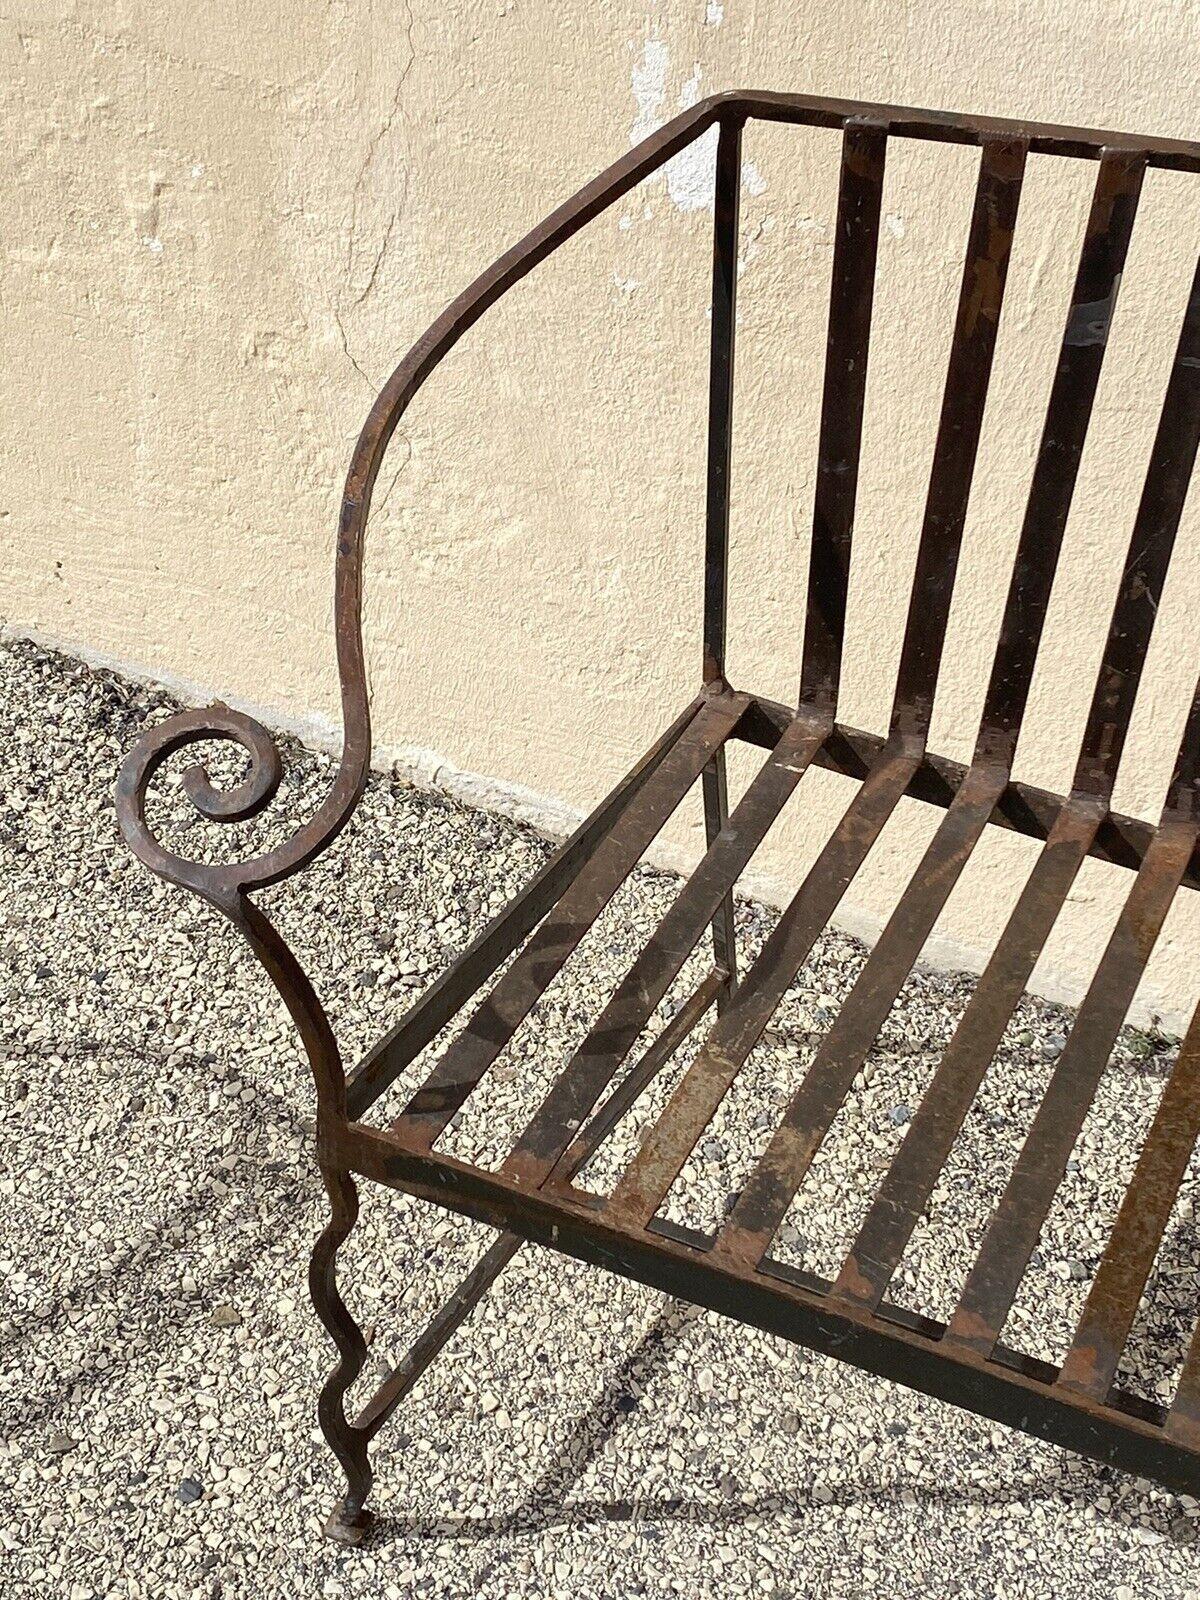 Vintage Hollywood Regency Wrought Iron Scrolling Garden Patio Loveseat Settee In Good Condition For Sale In Philadelphia, PA